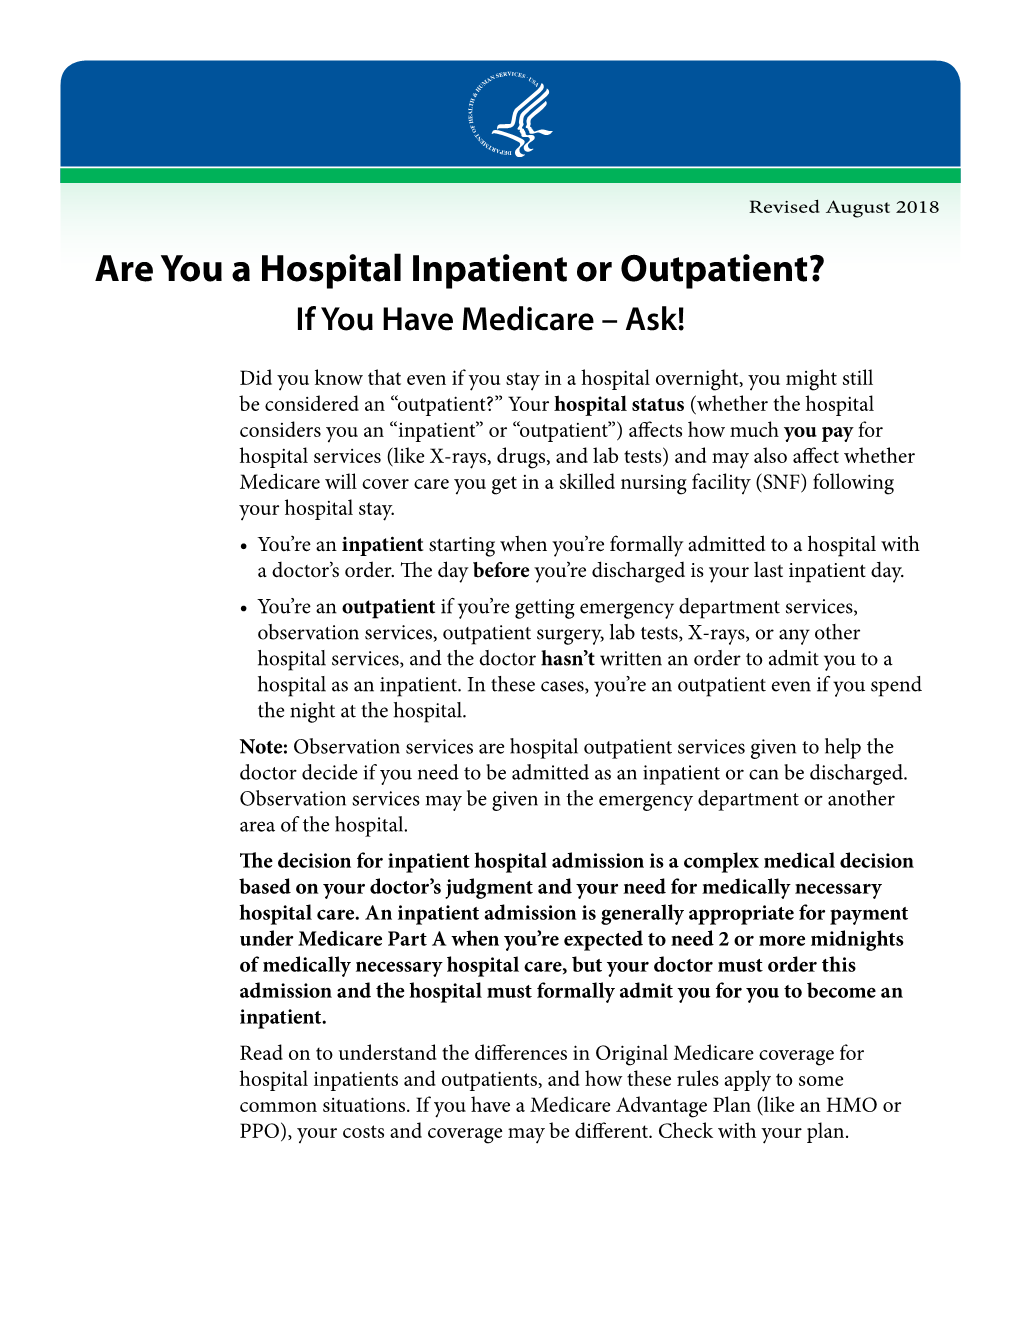 Are You a Hospital Inpatient Or Outpatient? If You Have Medicare – Ask!